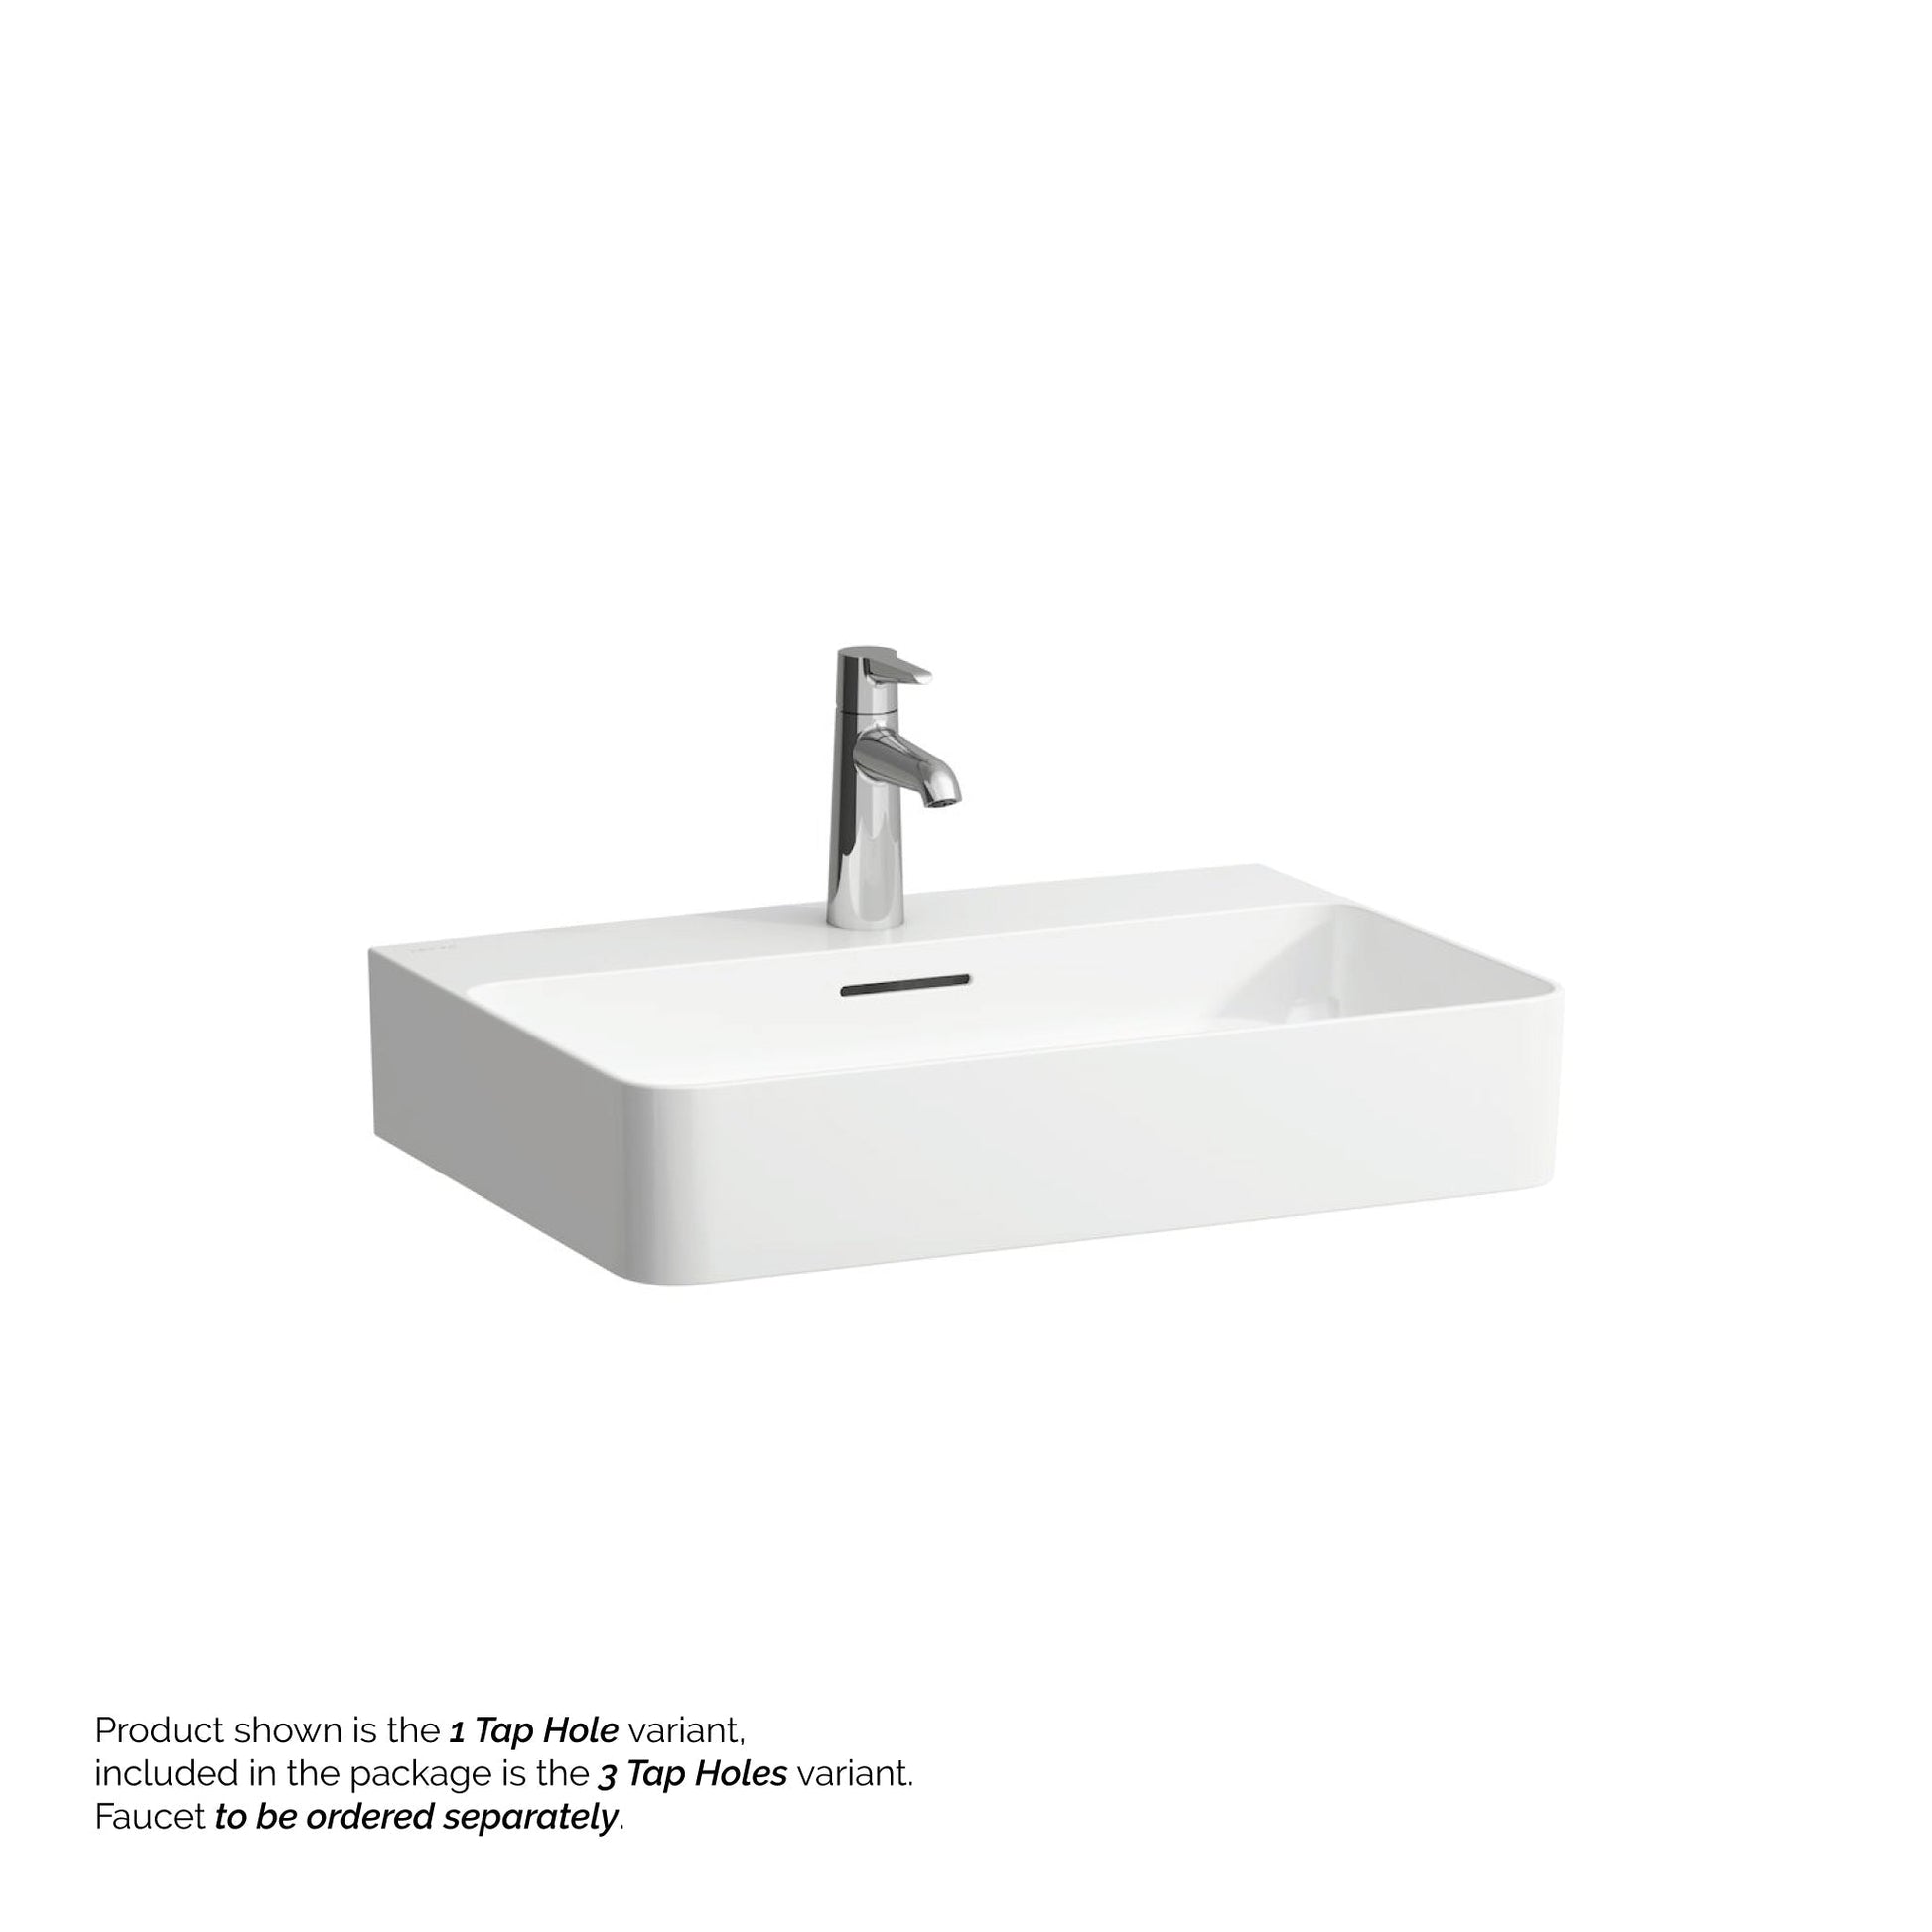 Laufen Val 24" x 17" White Ceramic Wall-Mounted Bathroom Sink With 3 Faucet Holes